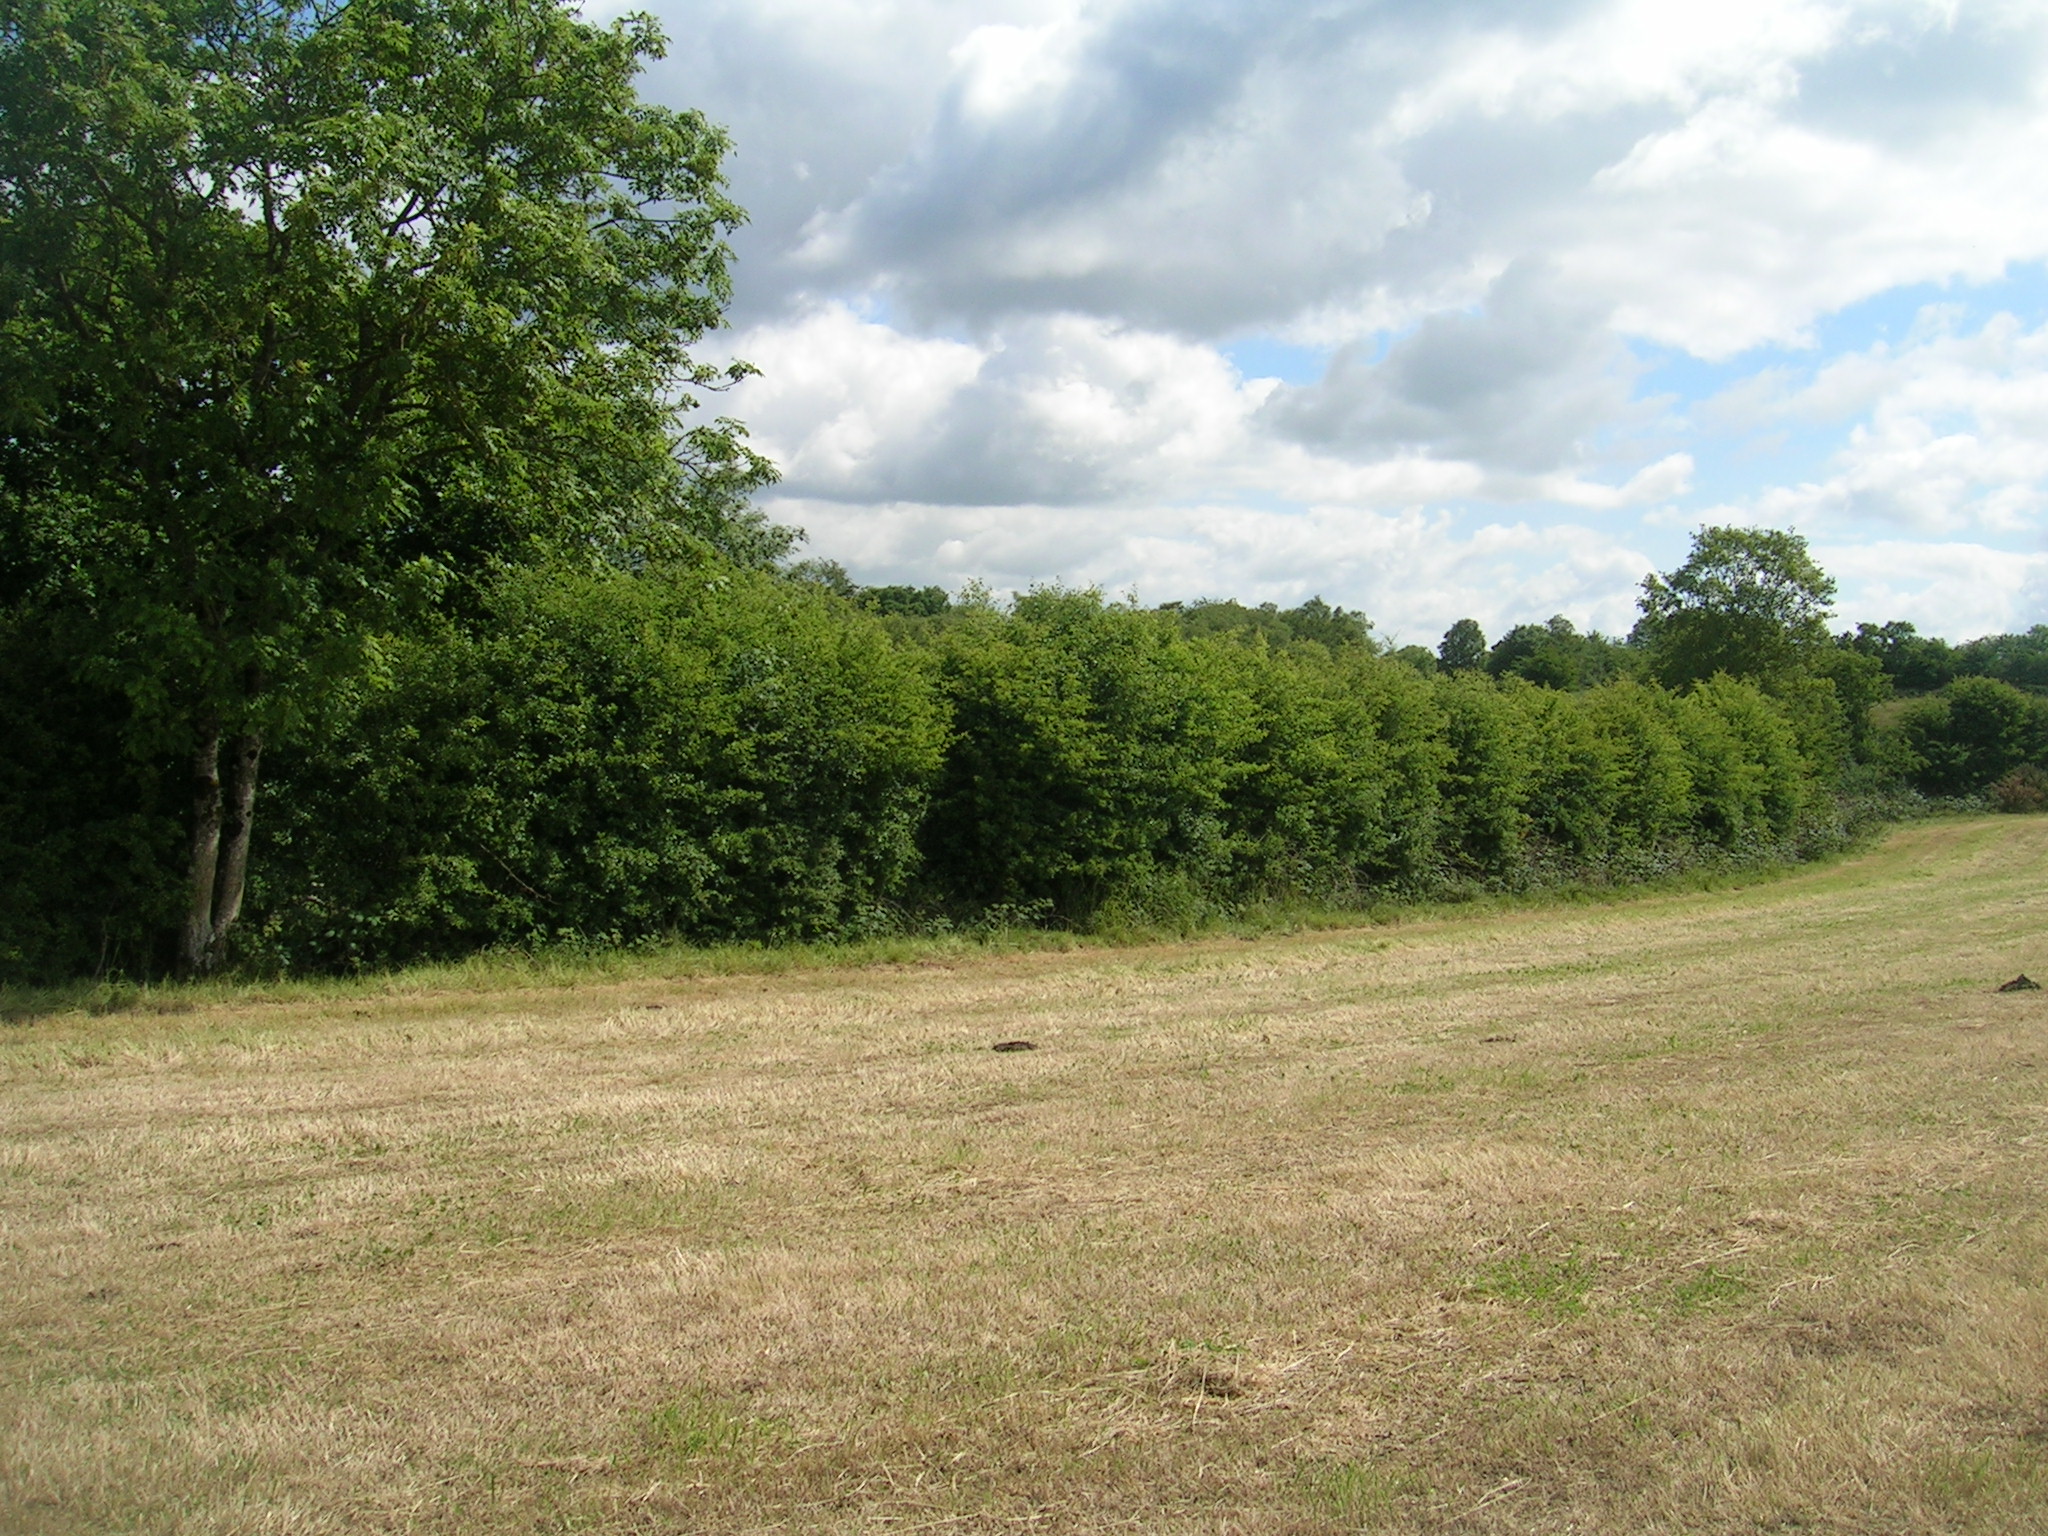 examples of Hedgerows